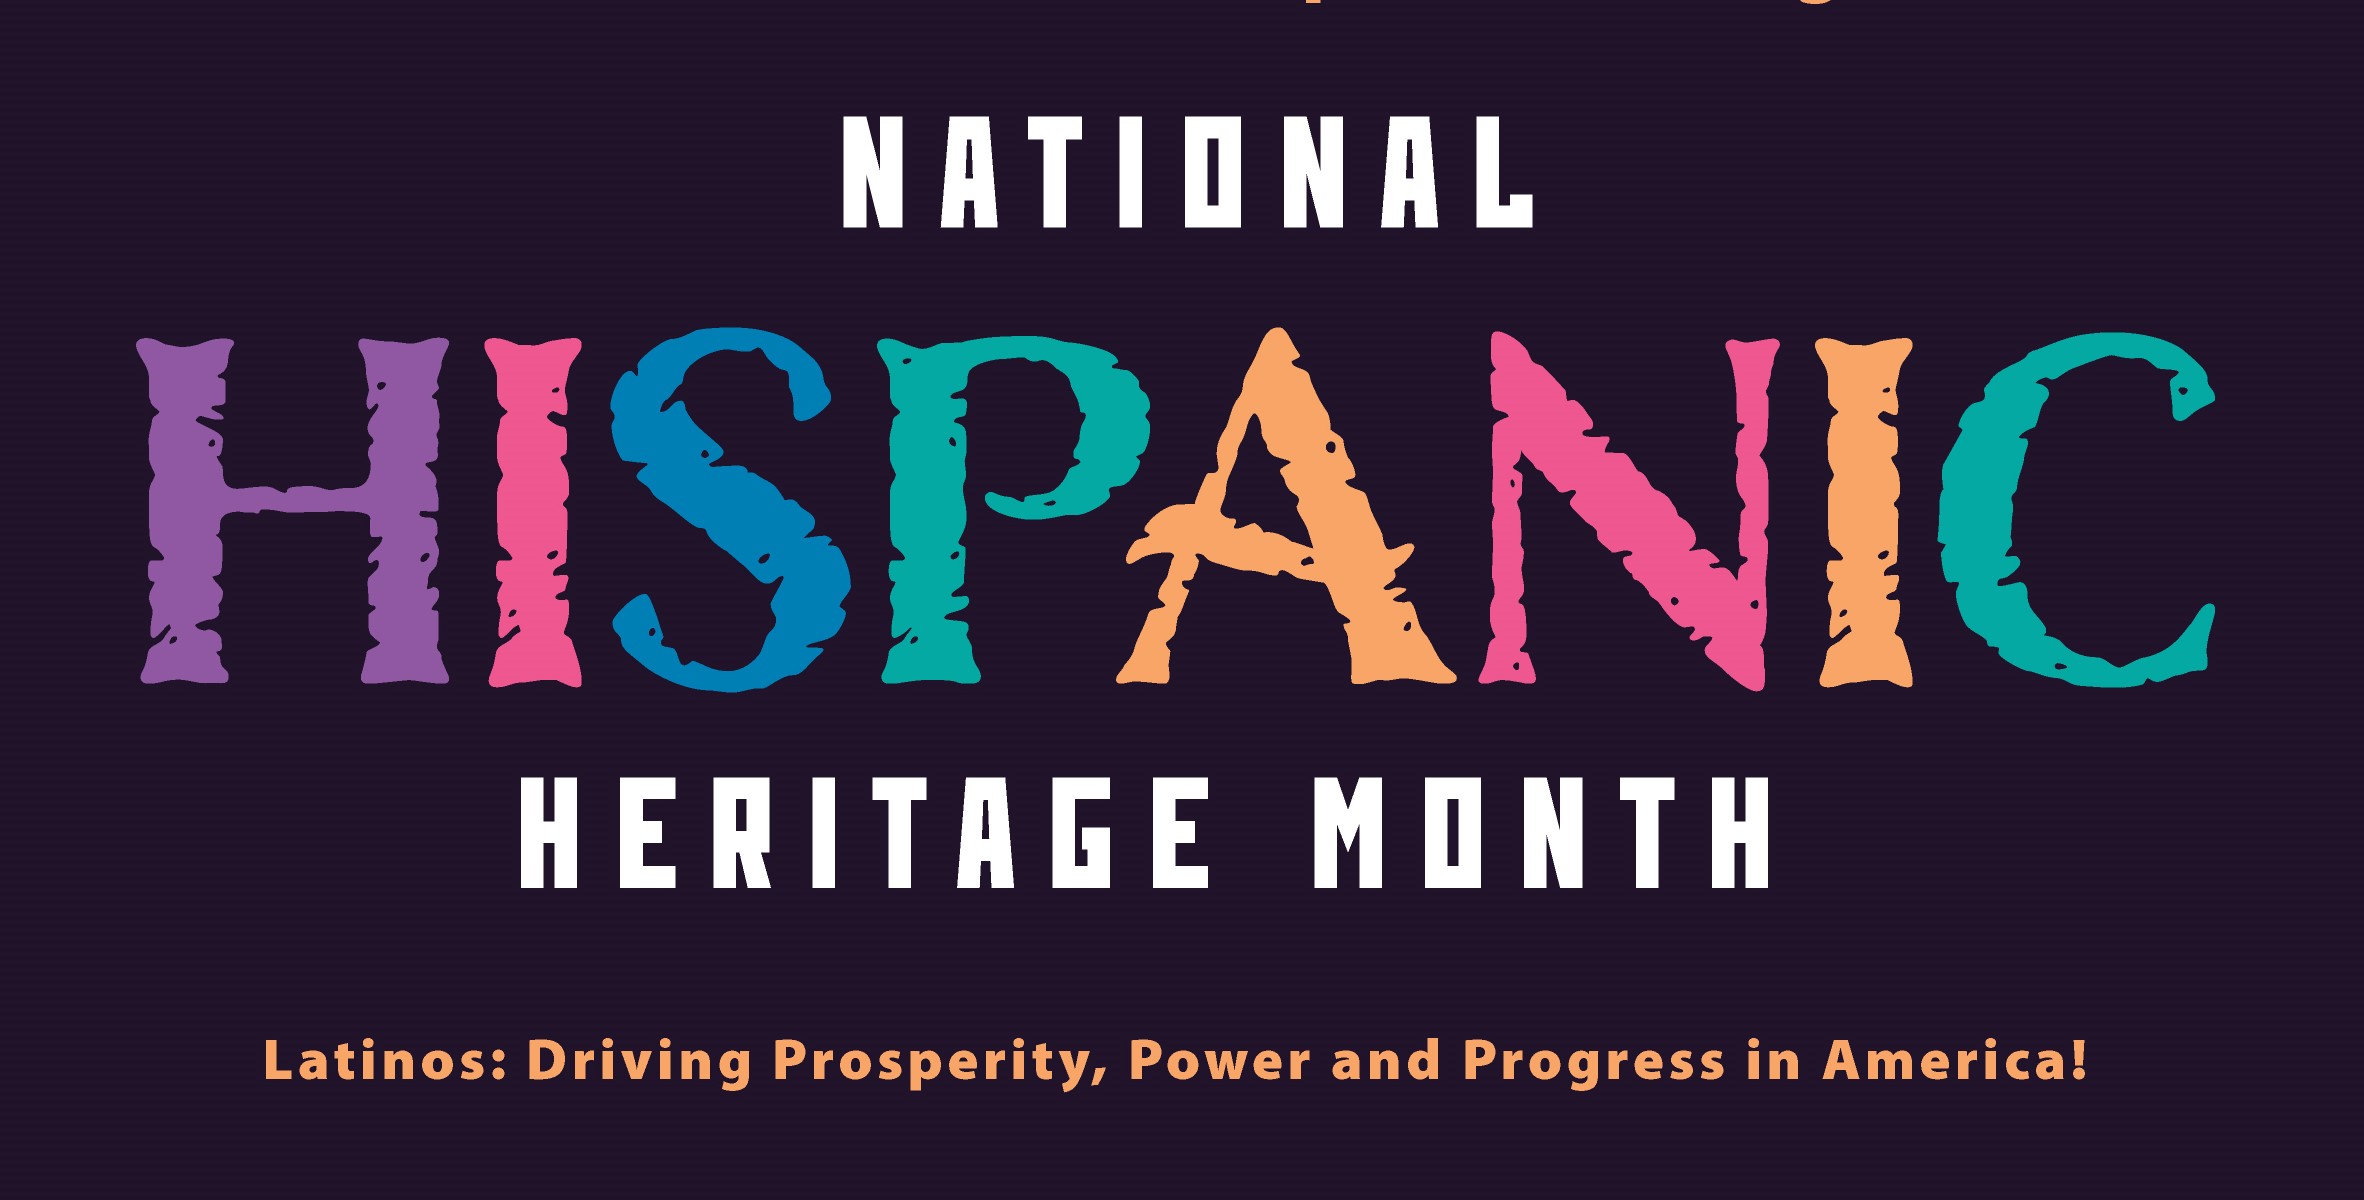 National Hispanic Heritage Month. Latinos: Driving Prosperity, Power and Progress in America!